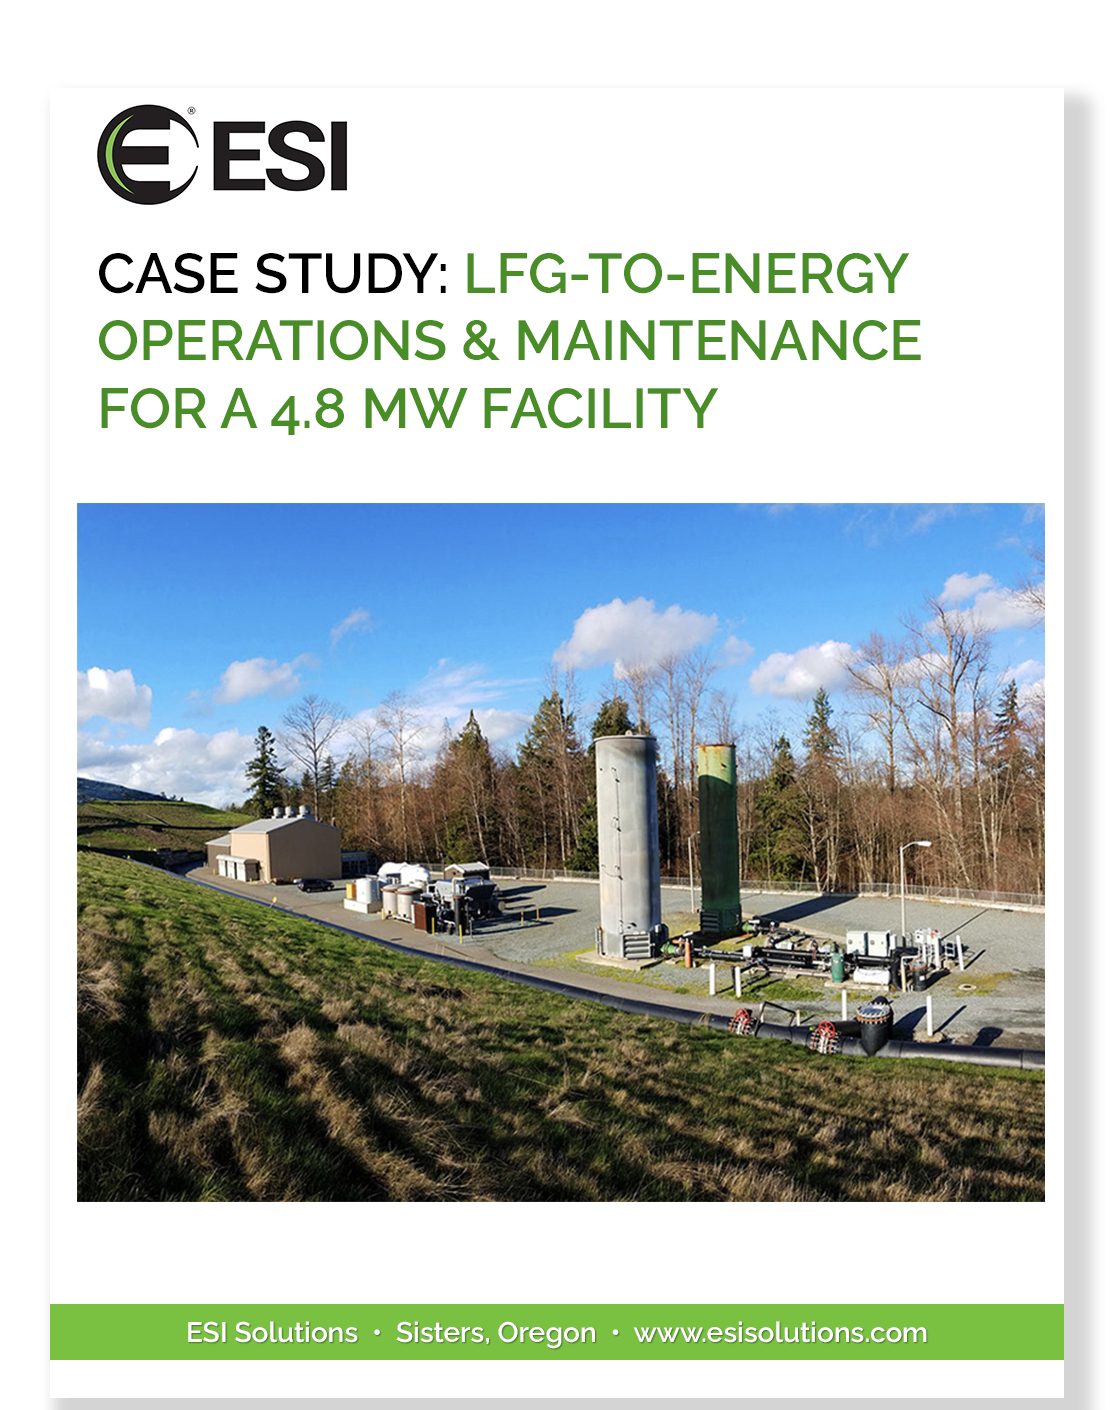 ESI Case Study - CASE STUDY- LFG-TO-ENERGY  OPERATIONS & MAINTENANCE FOR A 4.8 MW FACILITY COVER